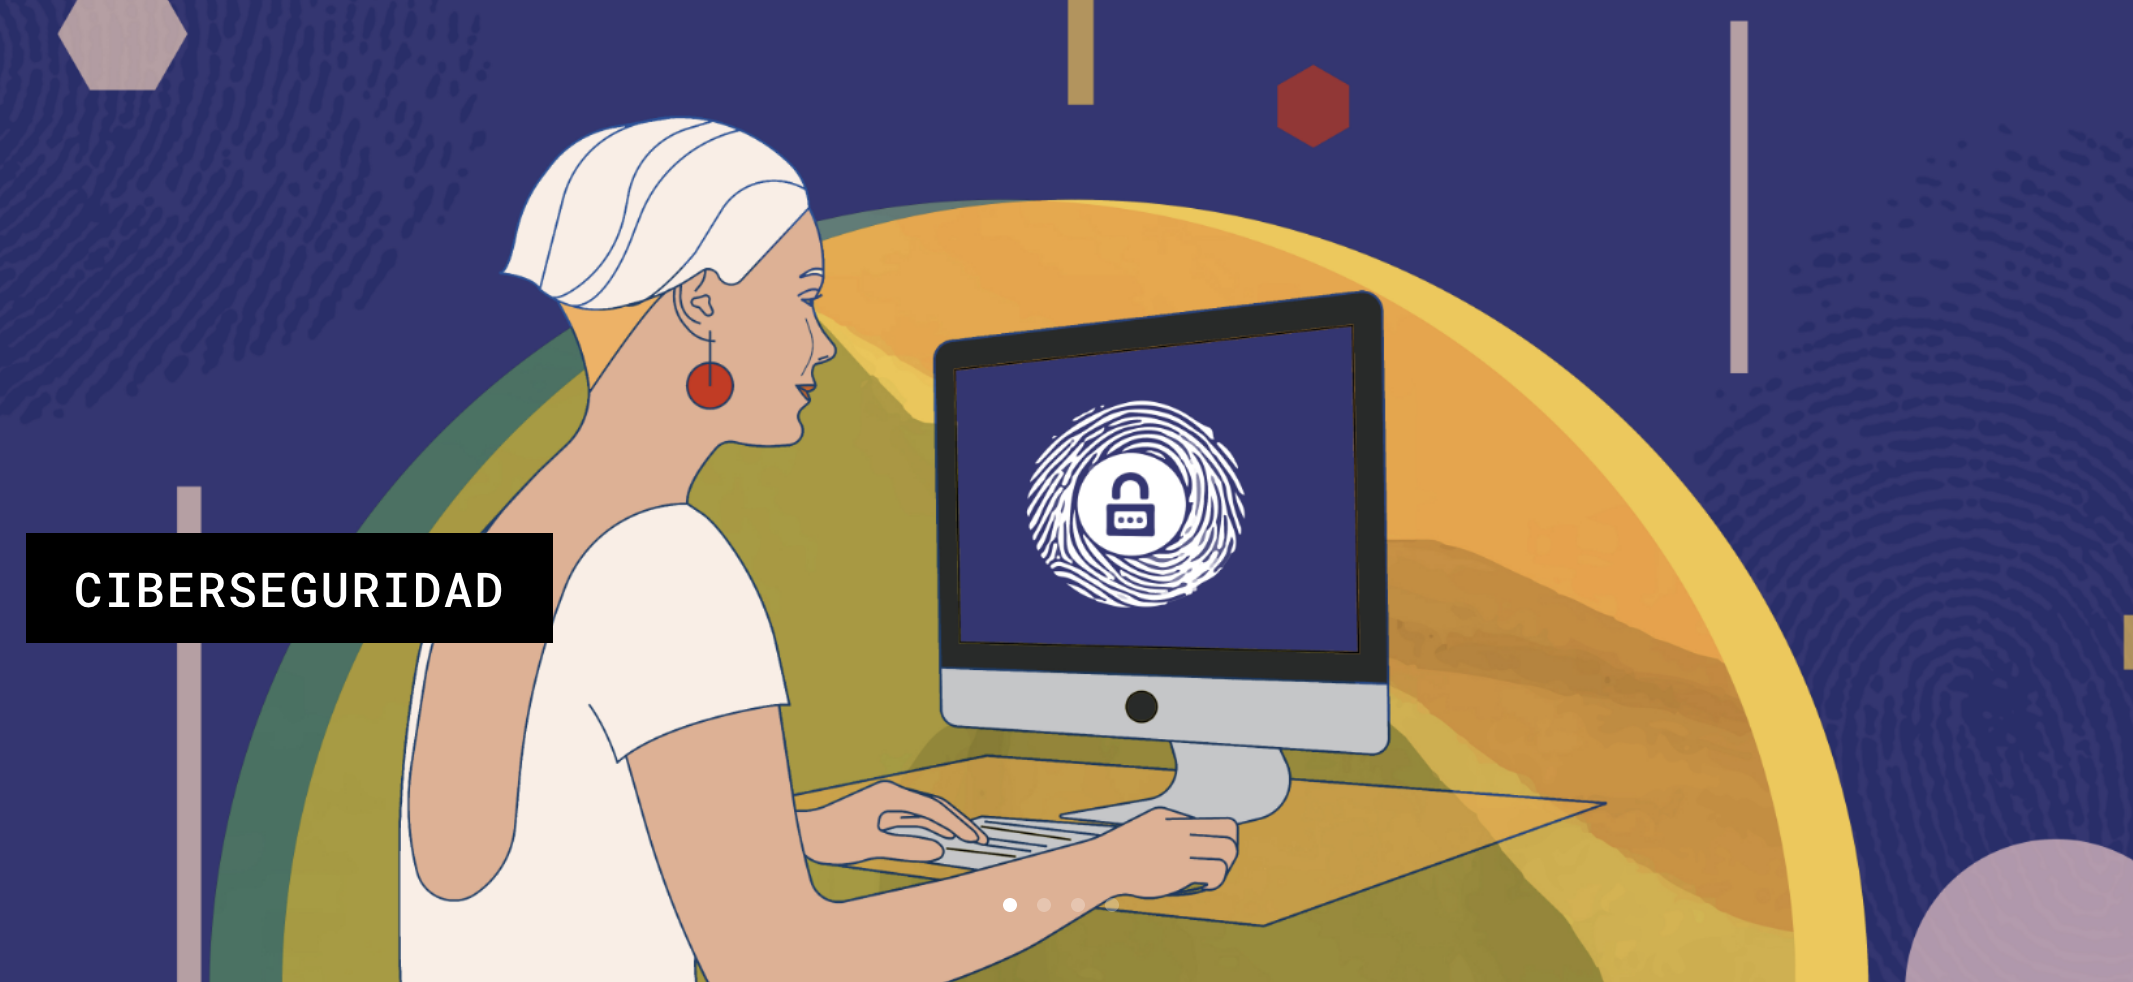 Graphic illustration of short haired woman using a computer that has a thumb print under a locked keypad icon on its screen. Behind is an abstract navy wallpaper with geometric shapes and fingerprints.